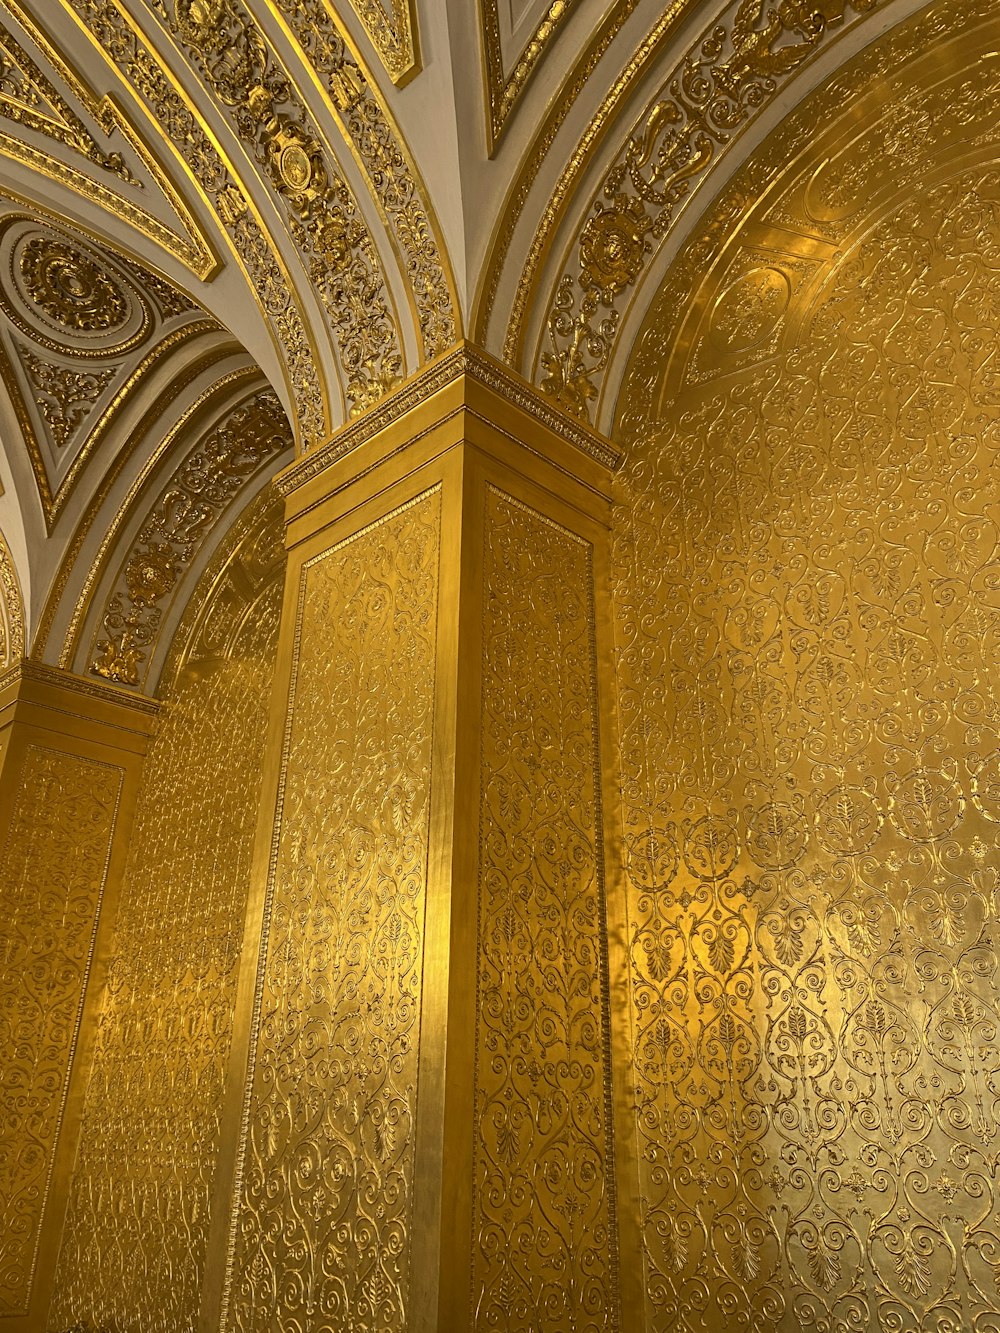 a golden wall in a building with a clock on it